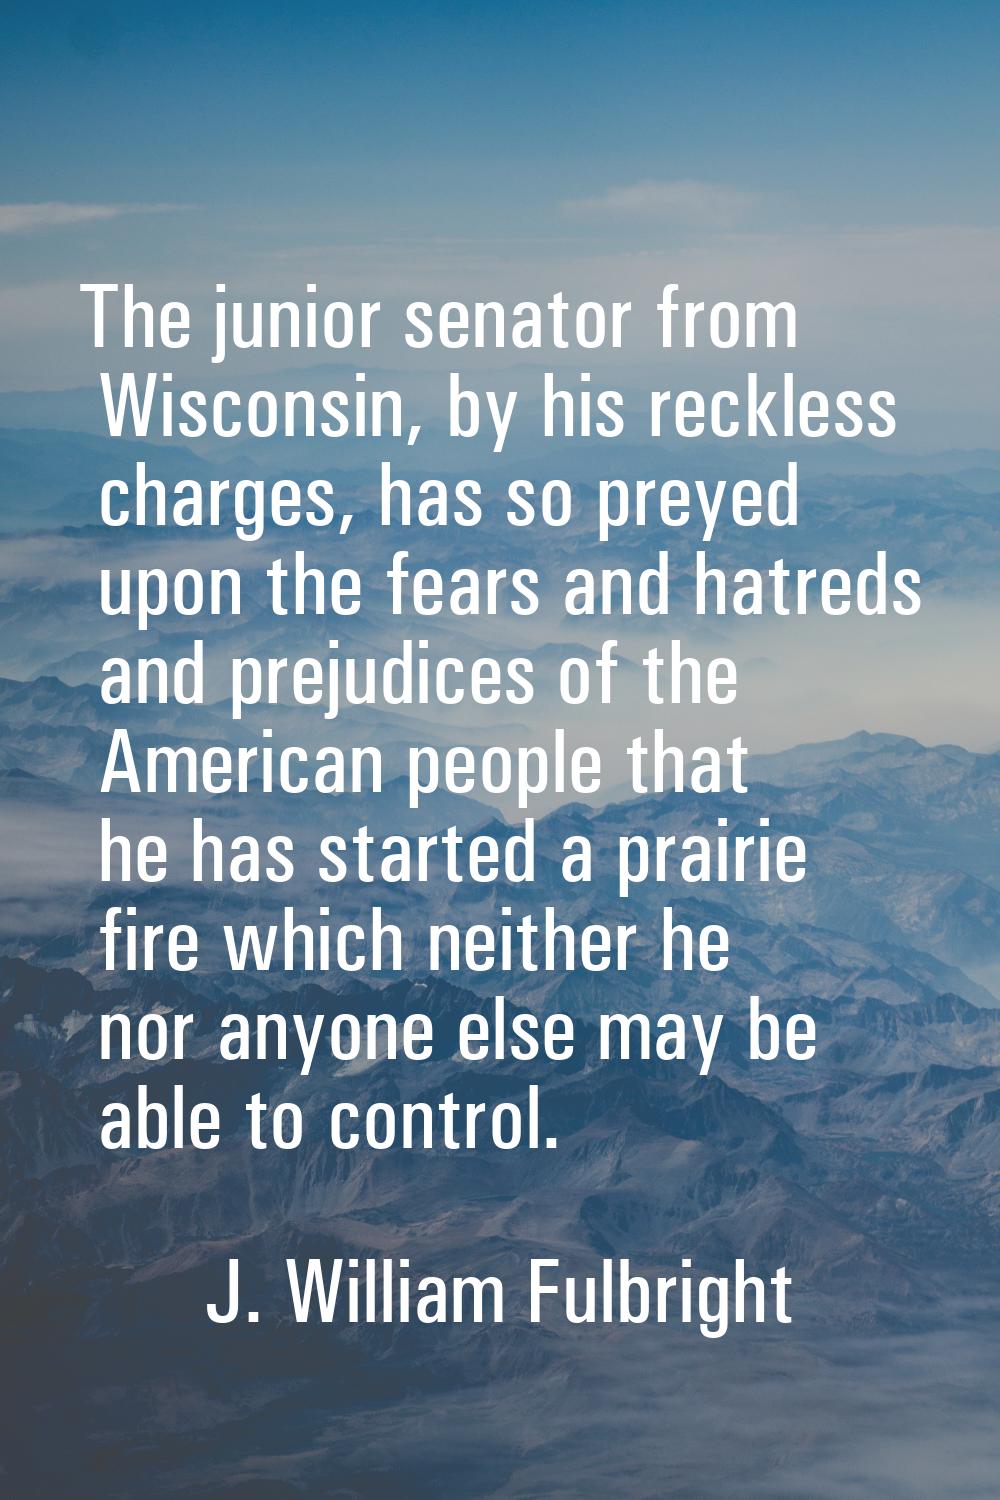 The junior senator from Wisconsin, by his reckless charges, has so preyed upon the fears and hatred